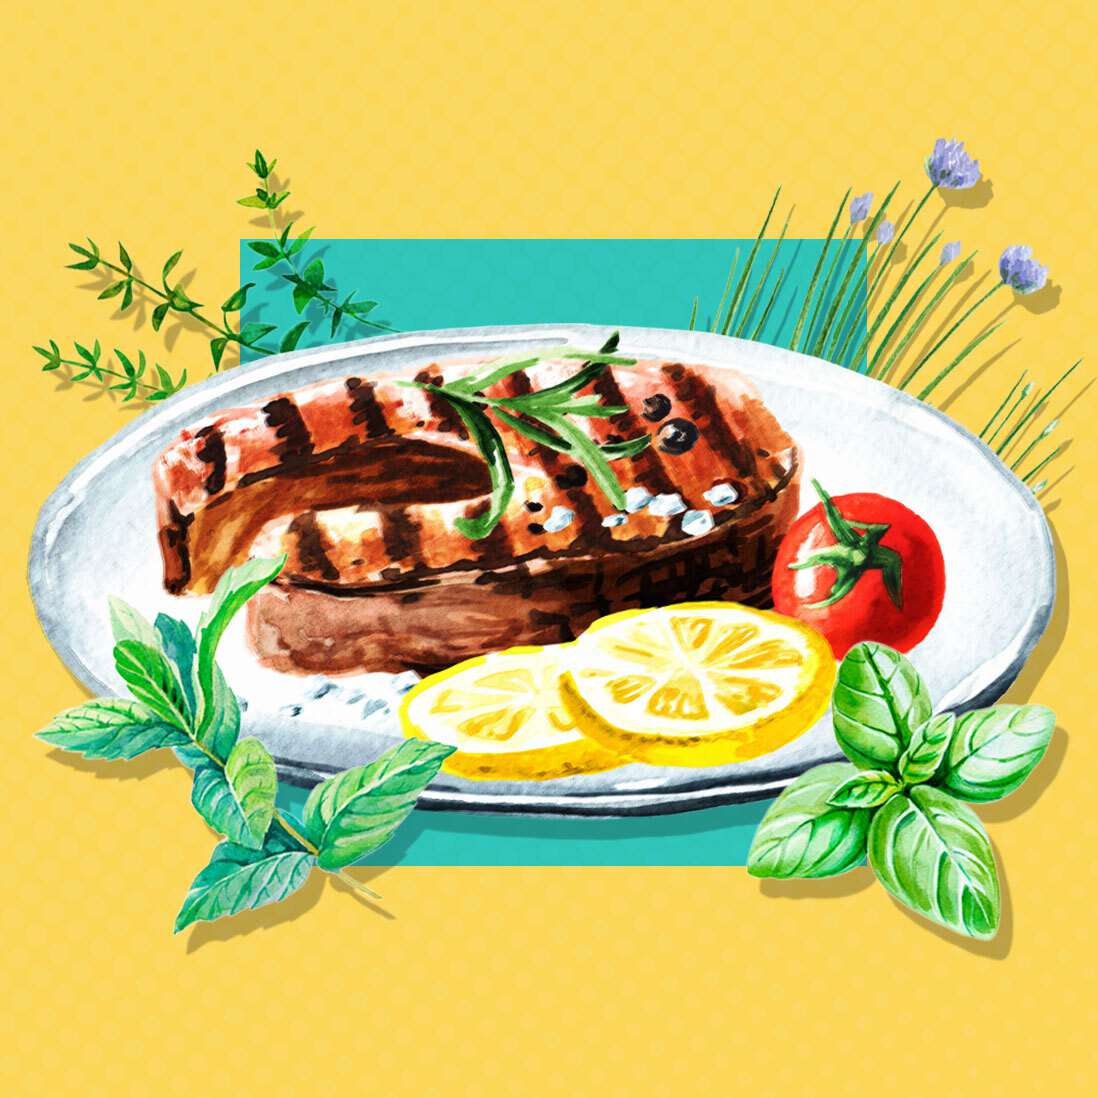 an illustrated dinner plate with a salmon steak topped with fresh rosemary and surrounded by a variety of illustrated herbs